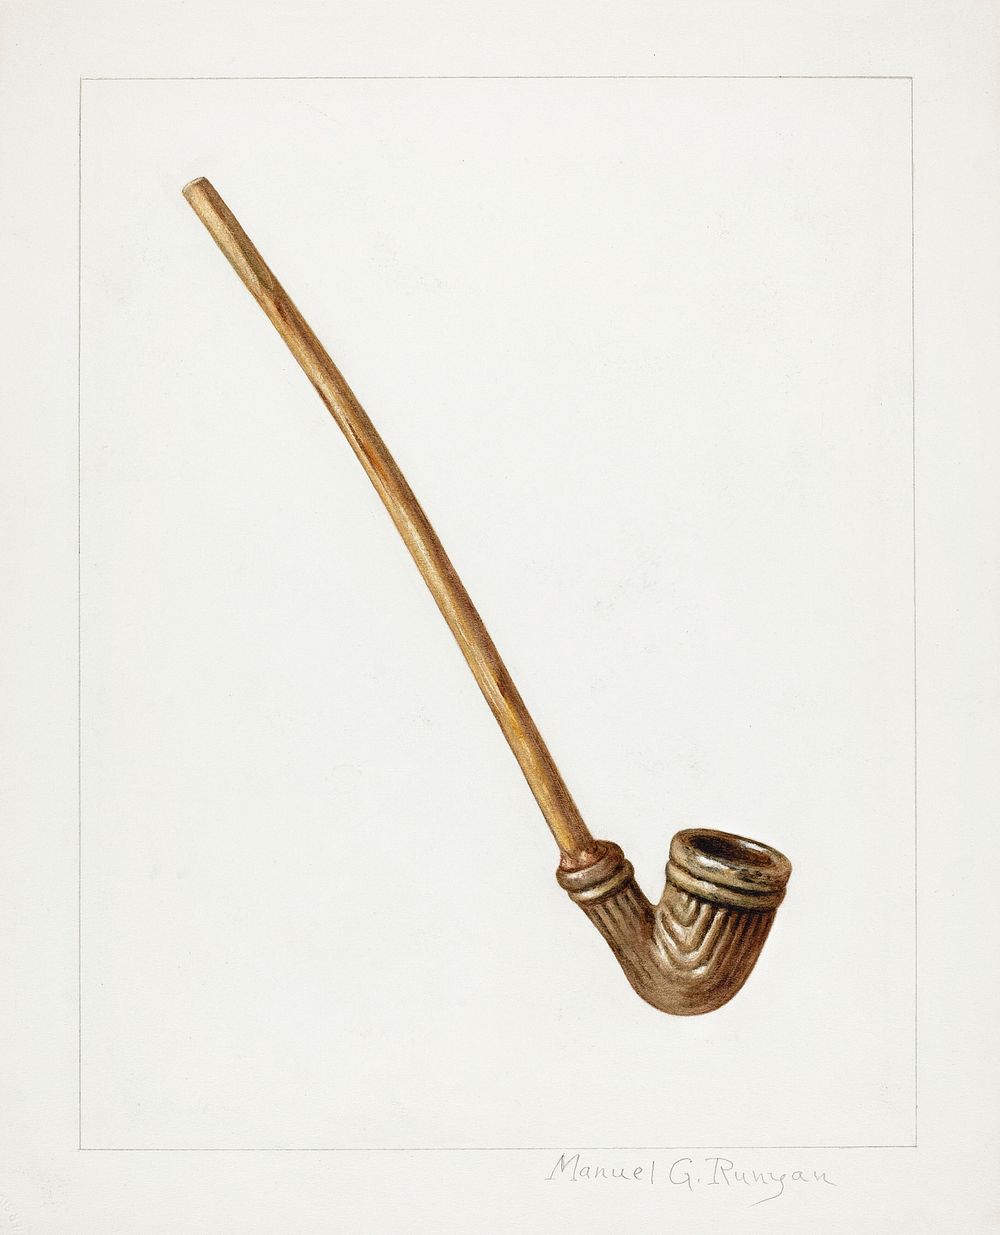 Pipe (ca. 1938) by Manuel G. Runyan. Original from The National Gallery of Art. Digitally enhanced by rawpixel.